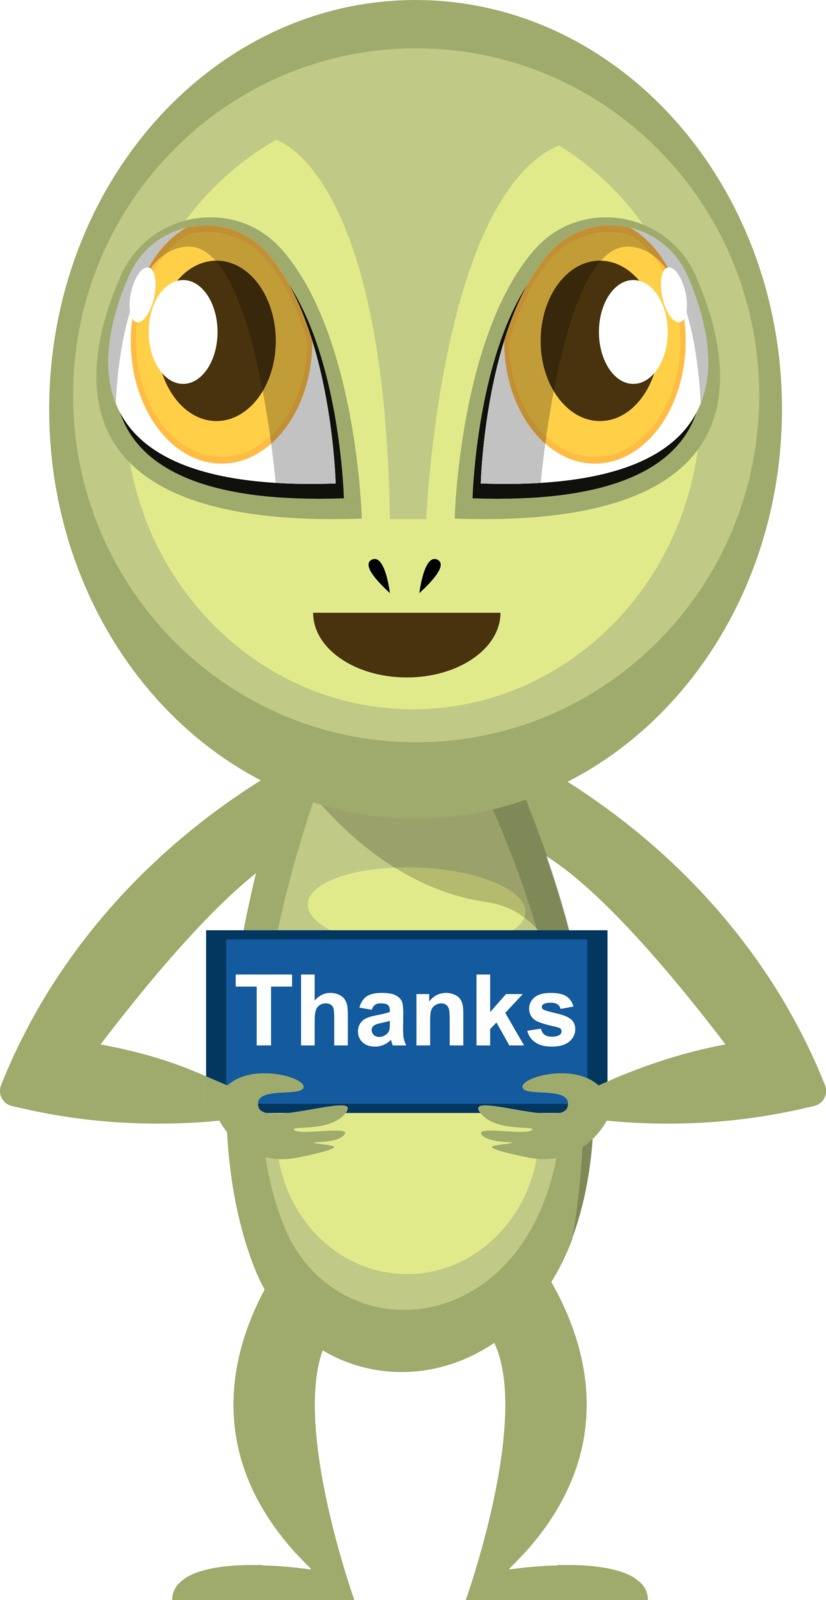 Alien with thank you sign, illustration, vector on white background.